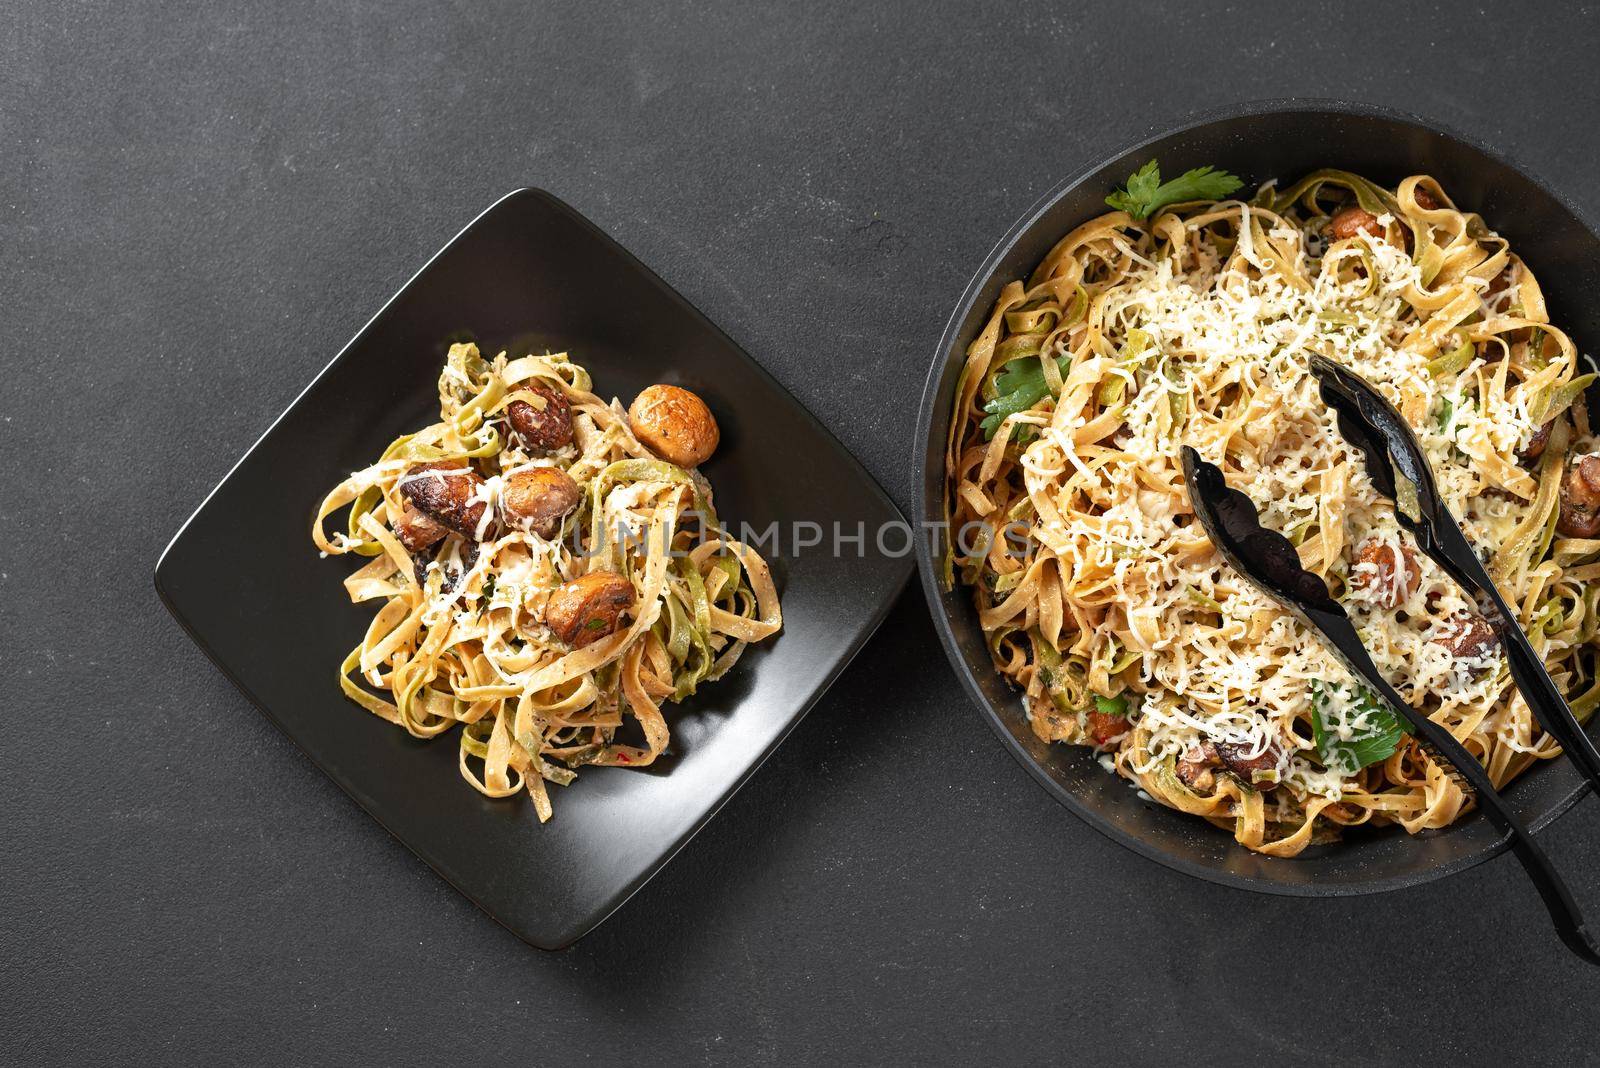 alfredo pasta with mushrooms in cream sauce on a black plate on a dark background. Freshly cooked pasta in a cast-iron skillet. Next to the plate with pasta is a classic Italian dish of fettuccini pasta